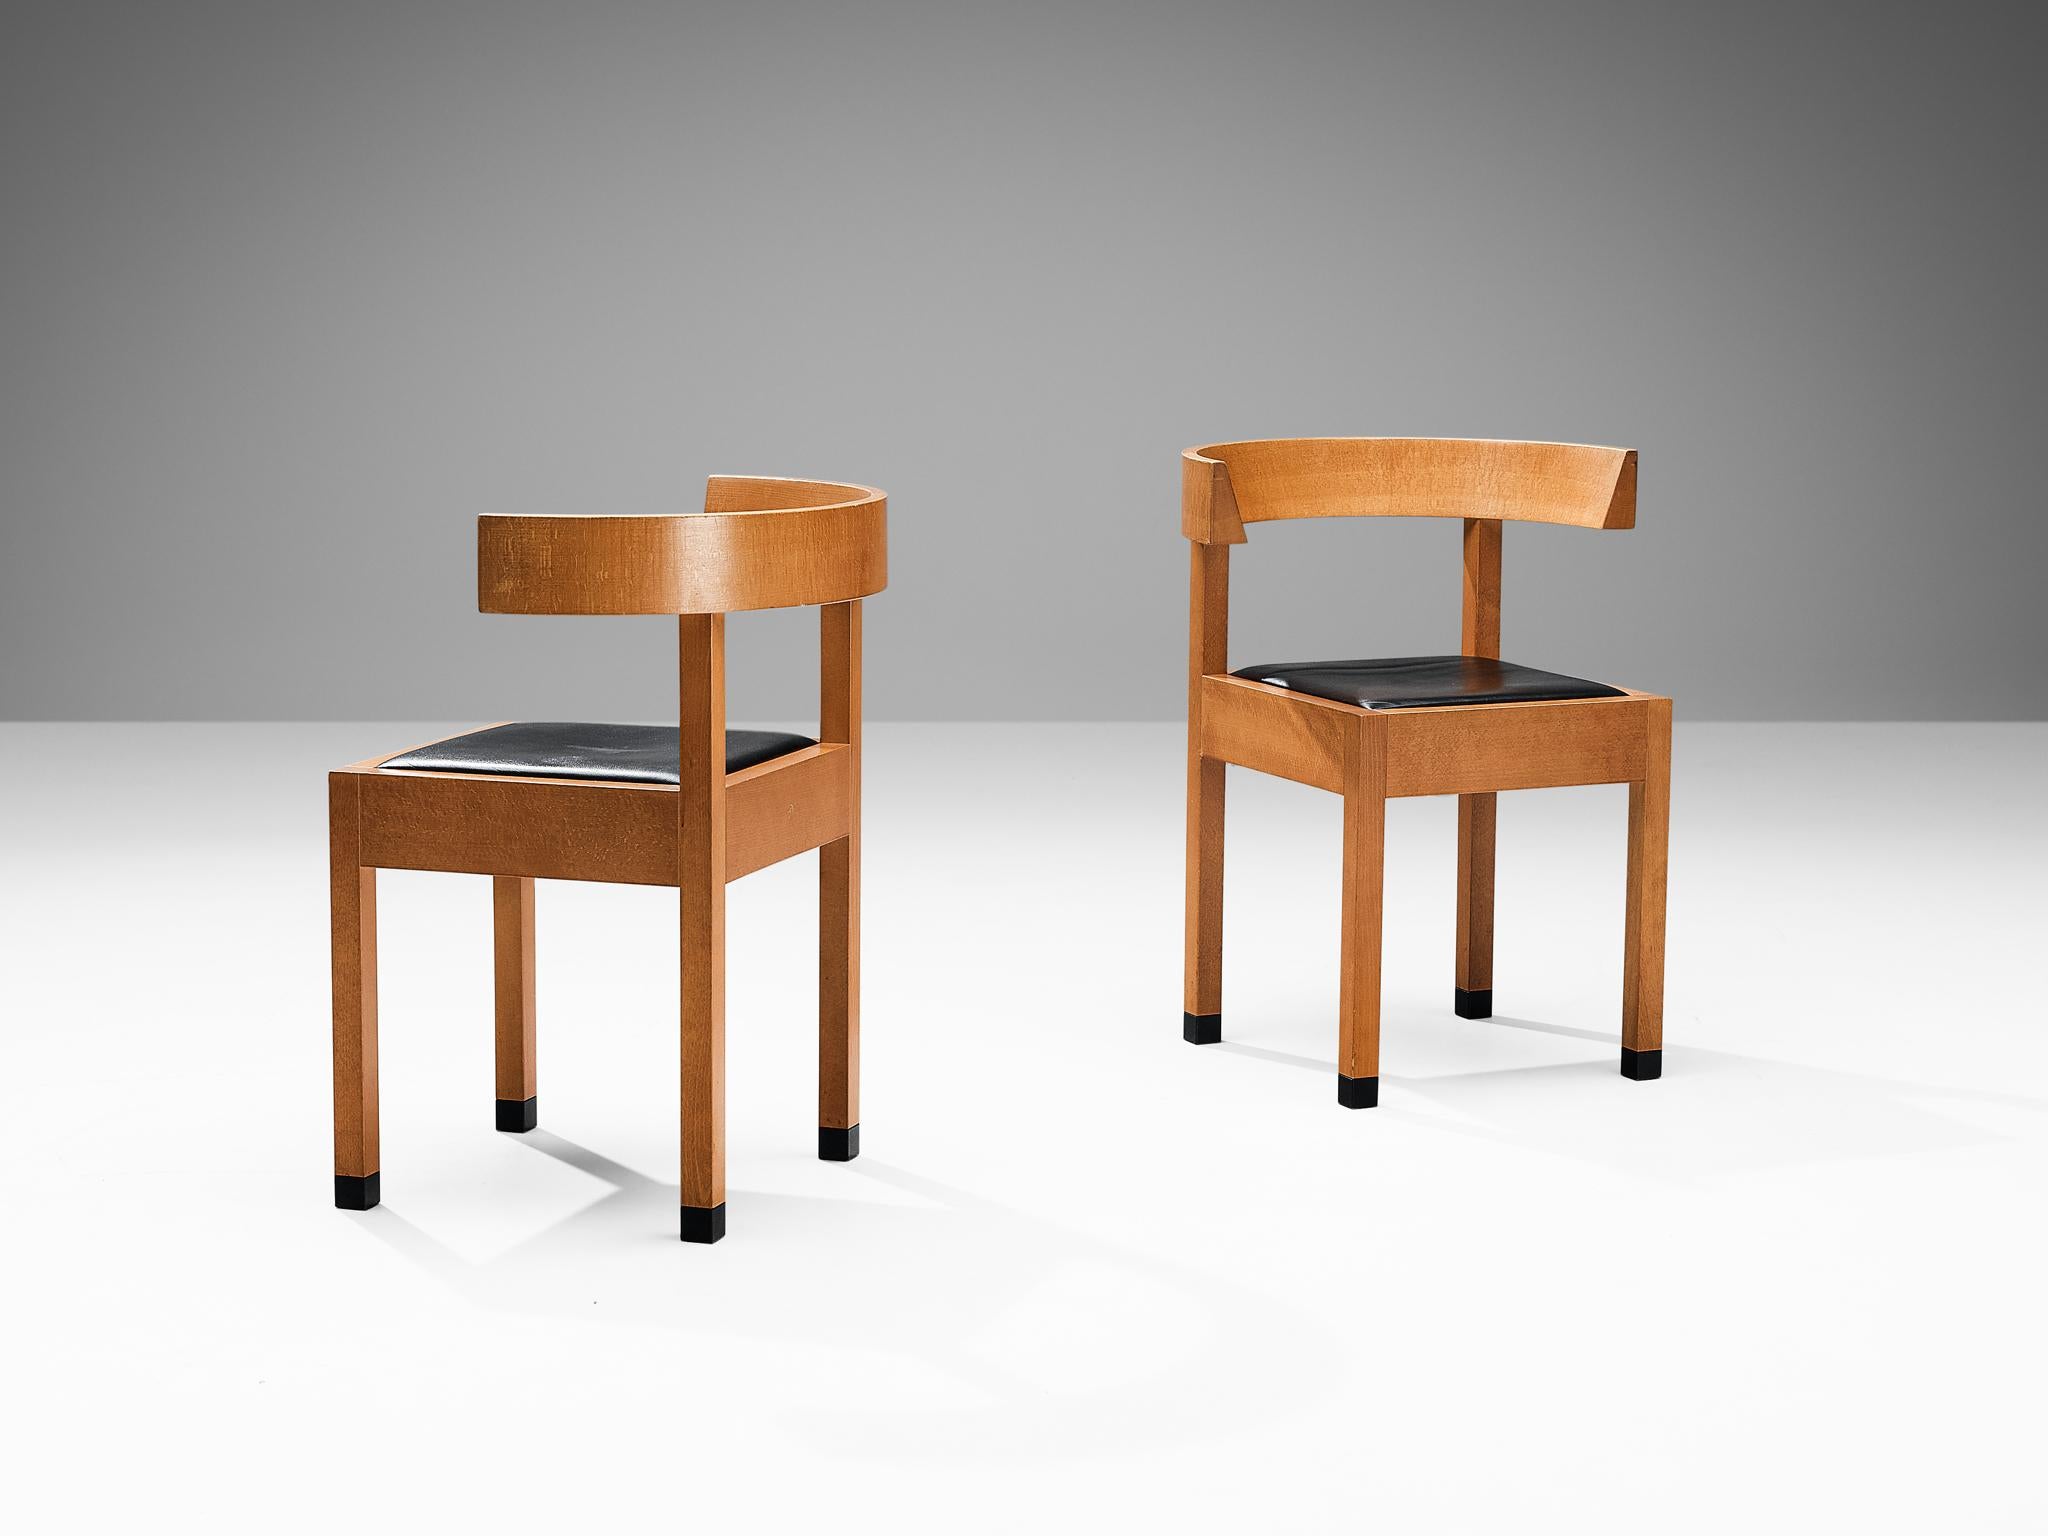 Oswald Mathias Ungers for Draenert, pair of 'Leonardo' dining chairs, beech, leather, Germany, design 1988

This pair of 'Leonardo' dining chairs are designed by Oswald Mathias Ungers. Professor Oswald Mathias Ungers was regarded as a strong